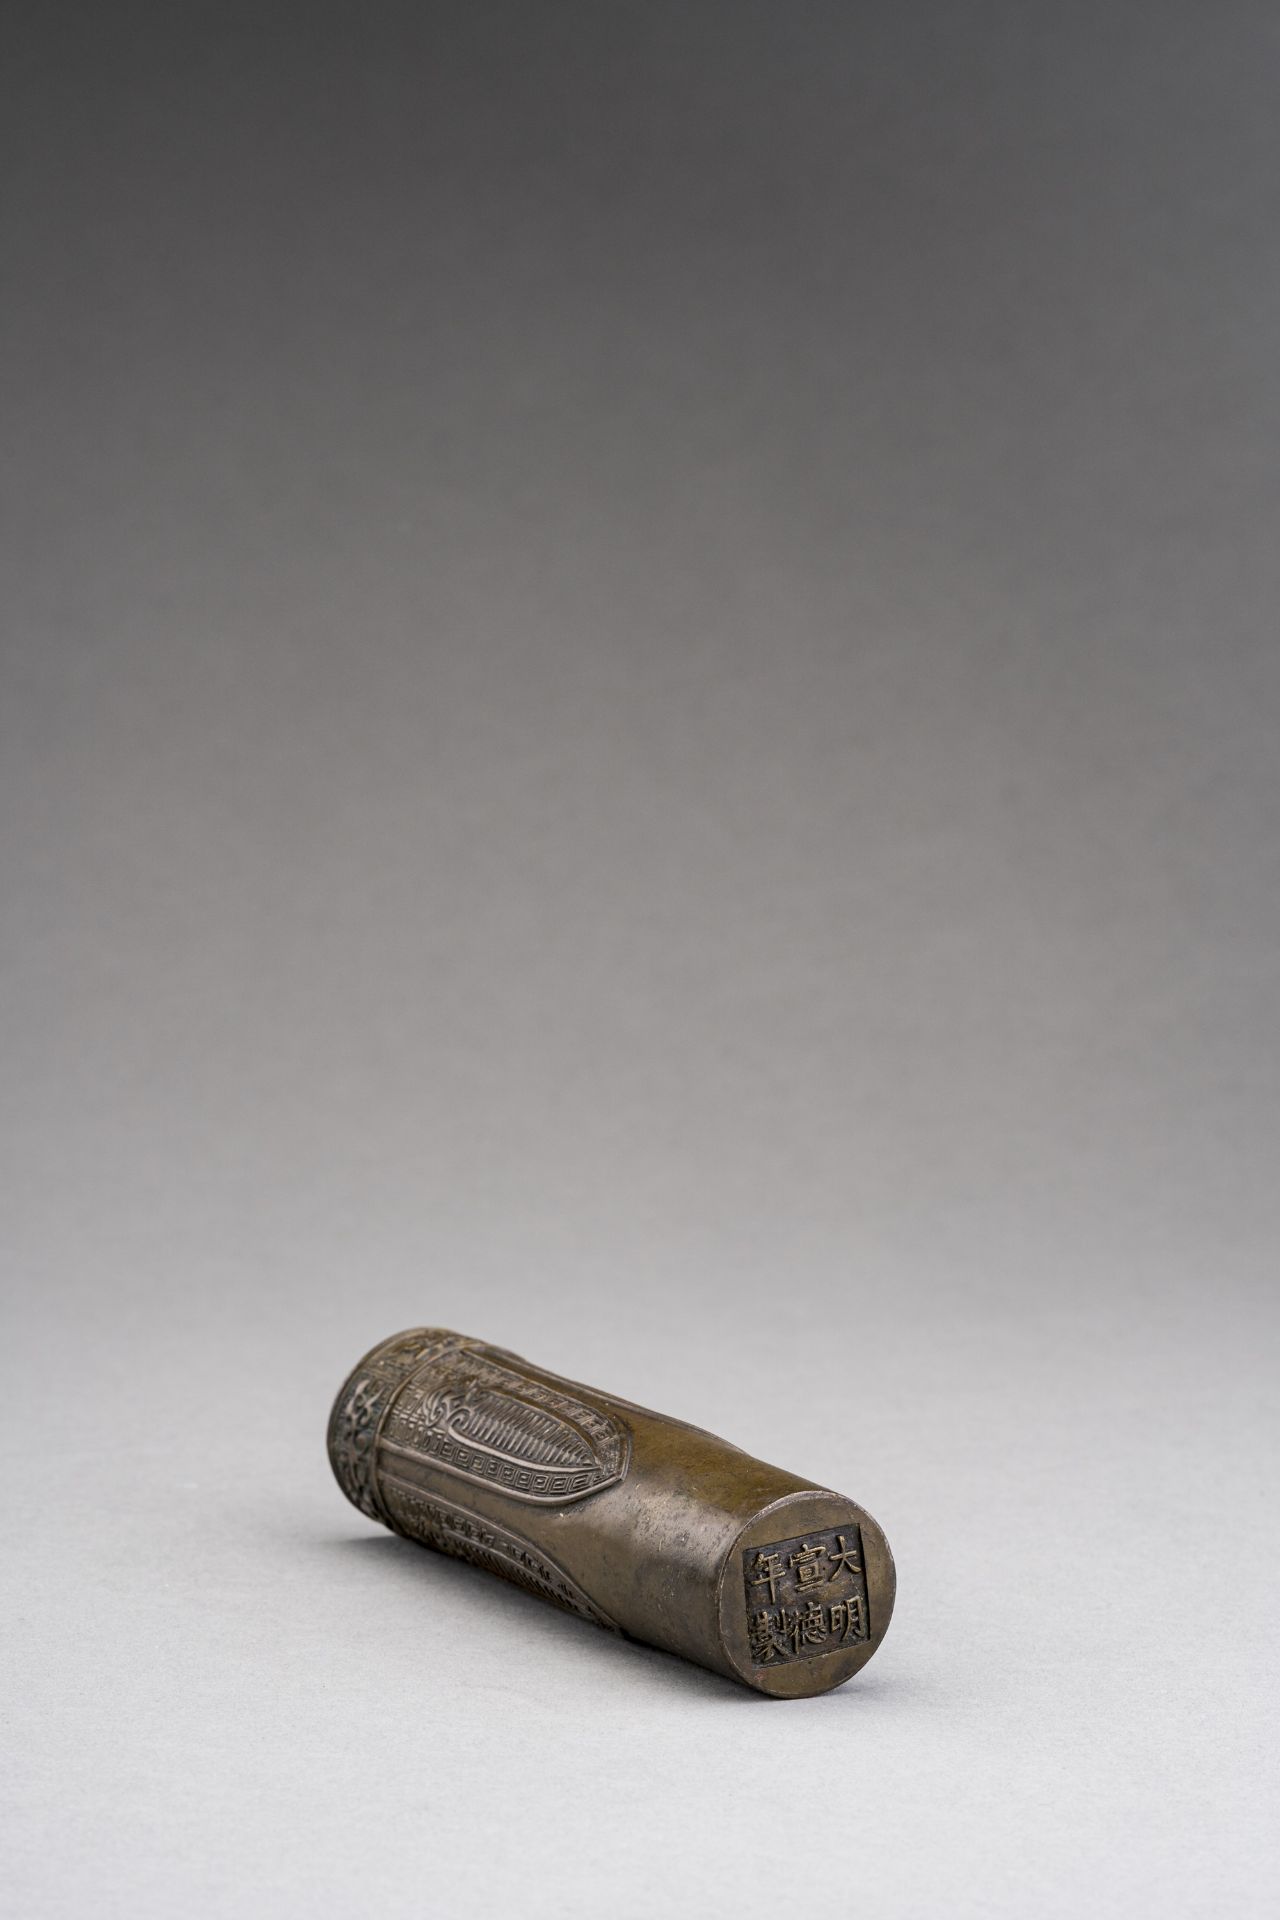 A BRONZE CYLINDRICAL VESSEL WITH CICADAS - Image 12 of 13